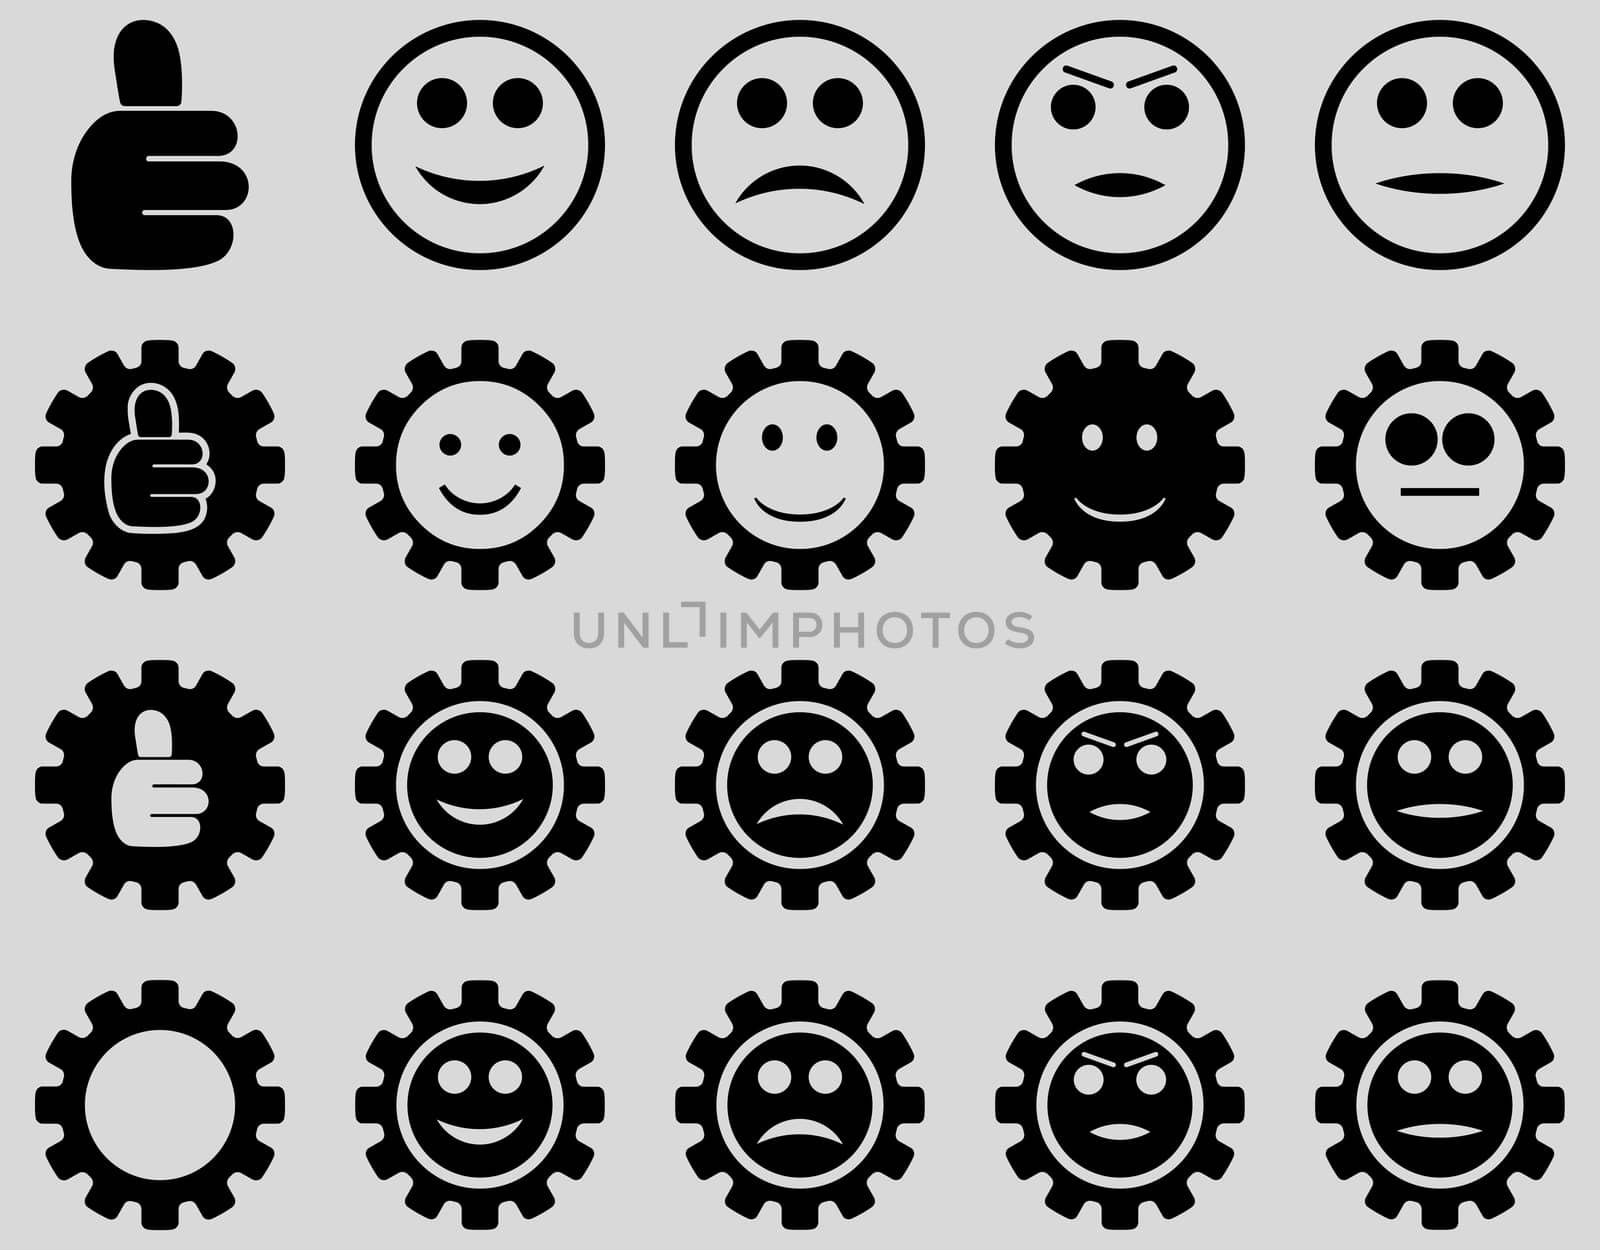 Settings and Smile Gears Icons. Glyph set style is flat images, black color, isolated on a light gray background.